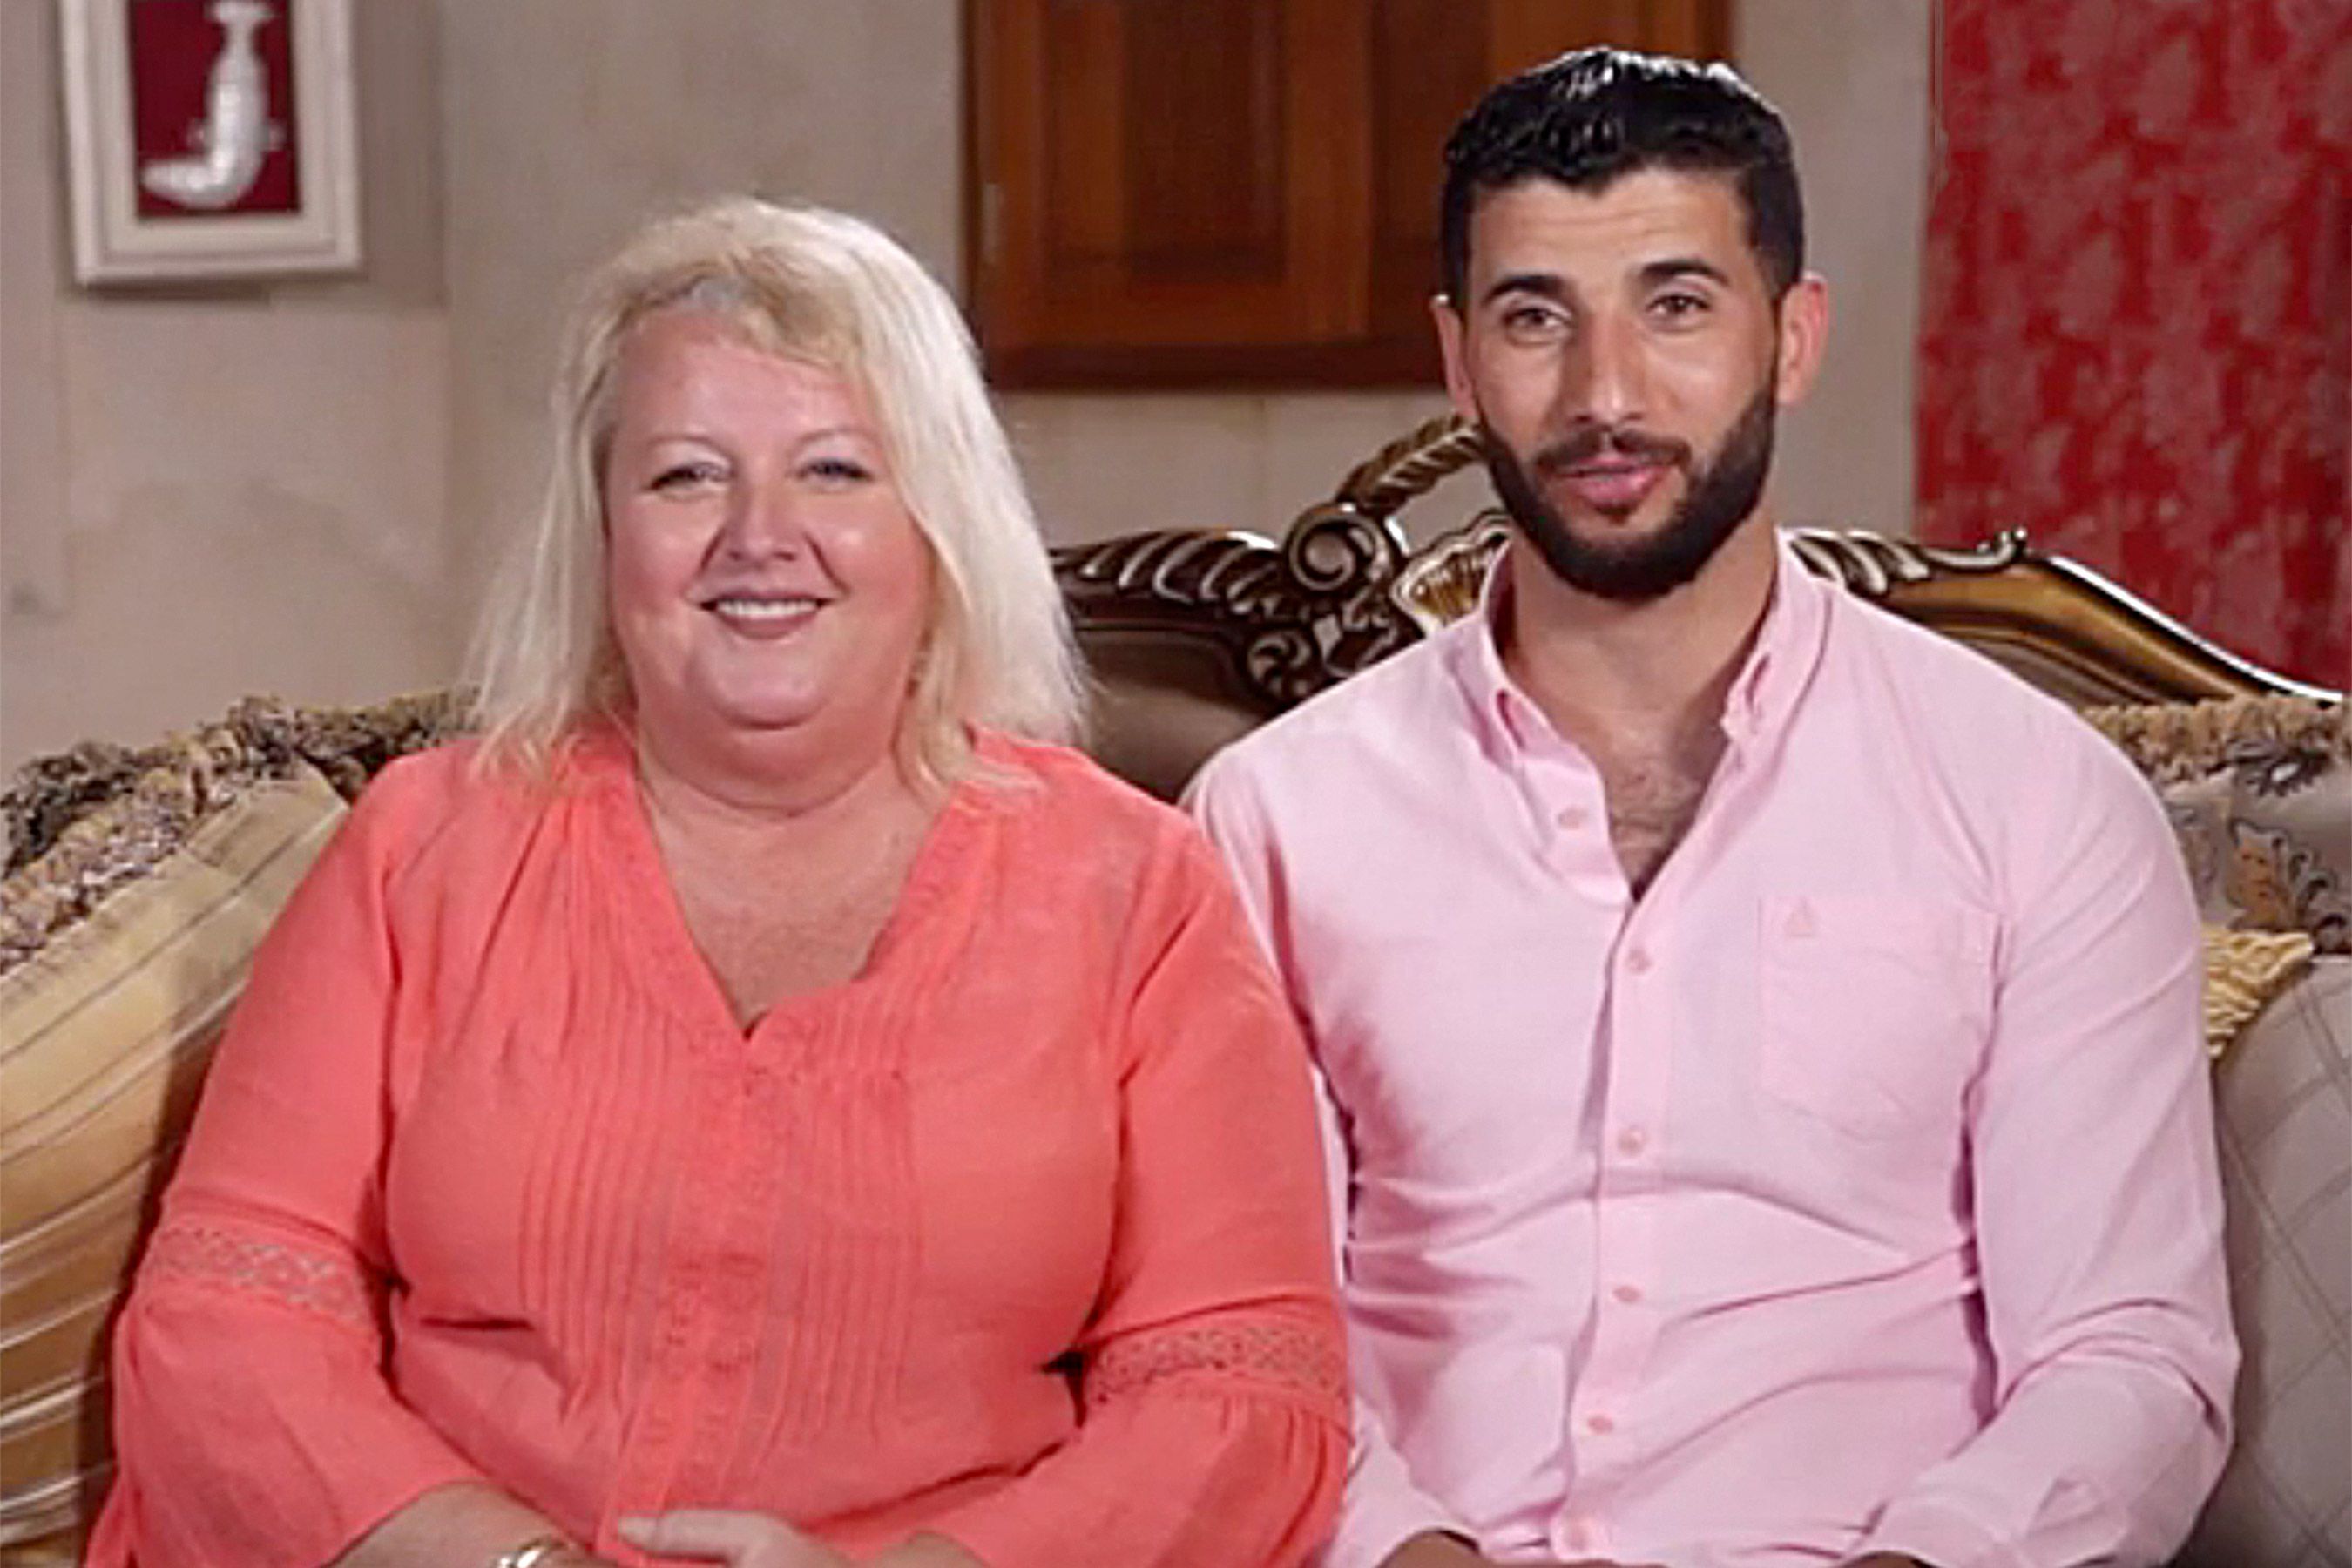 Lauren and Aladin sitting on a sofa smiling in 90 Day Fiance.